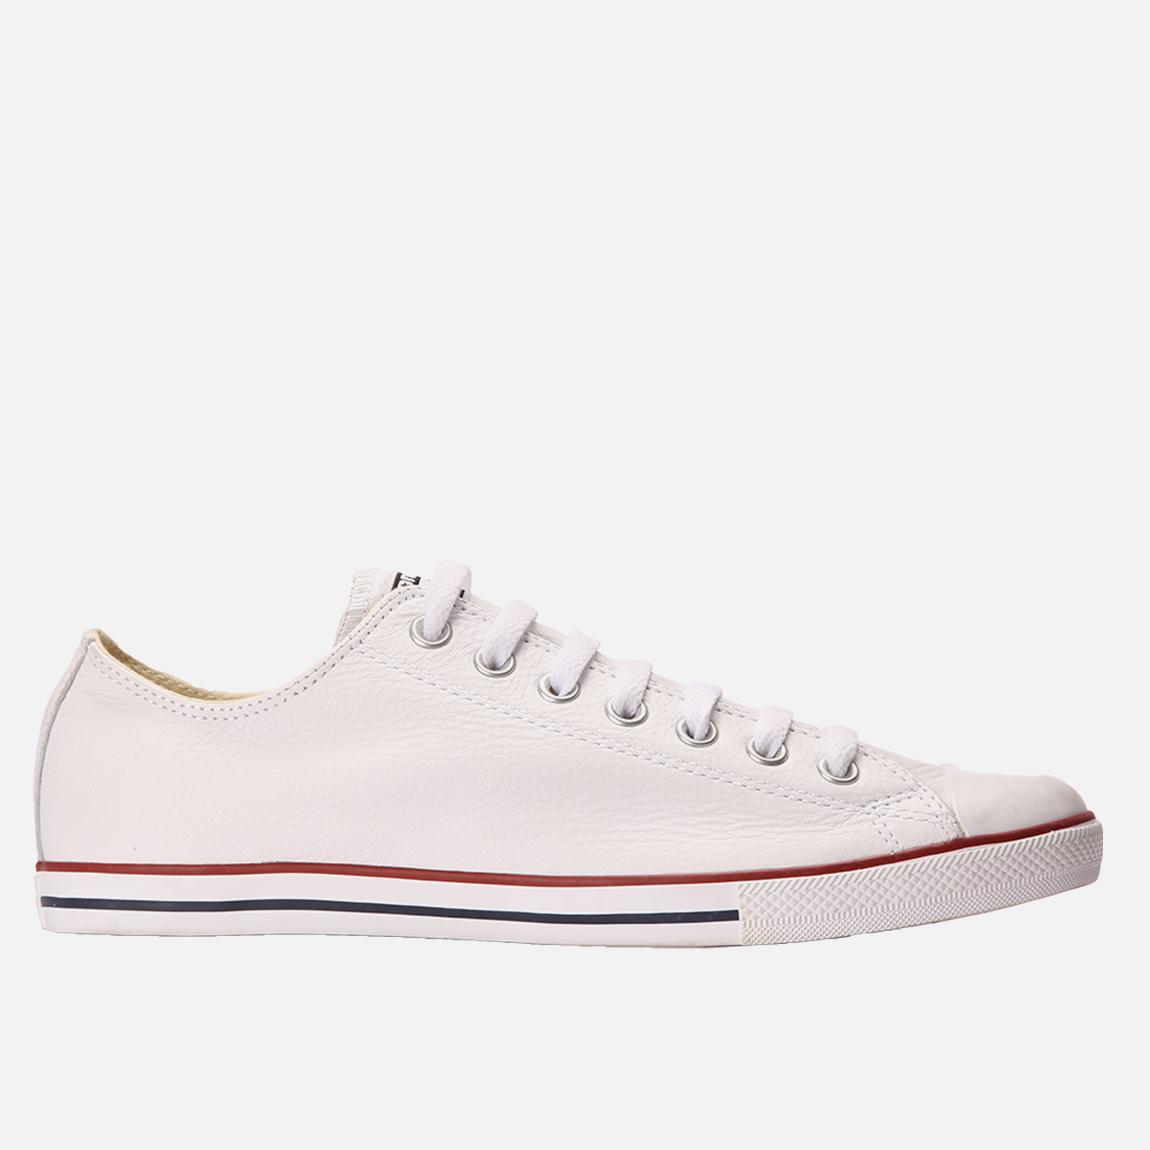 Chuck Taylor All Star Lean – White Converse Sneakers | Superbalist.com